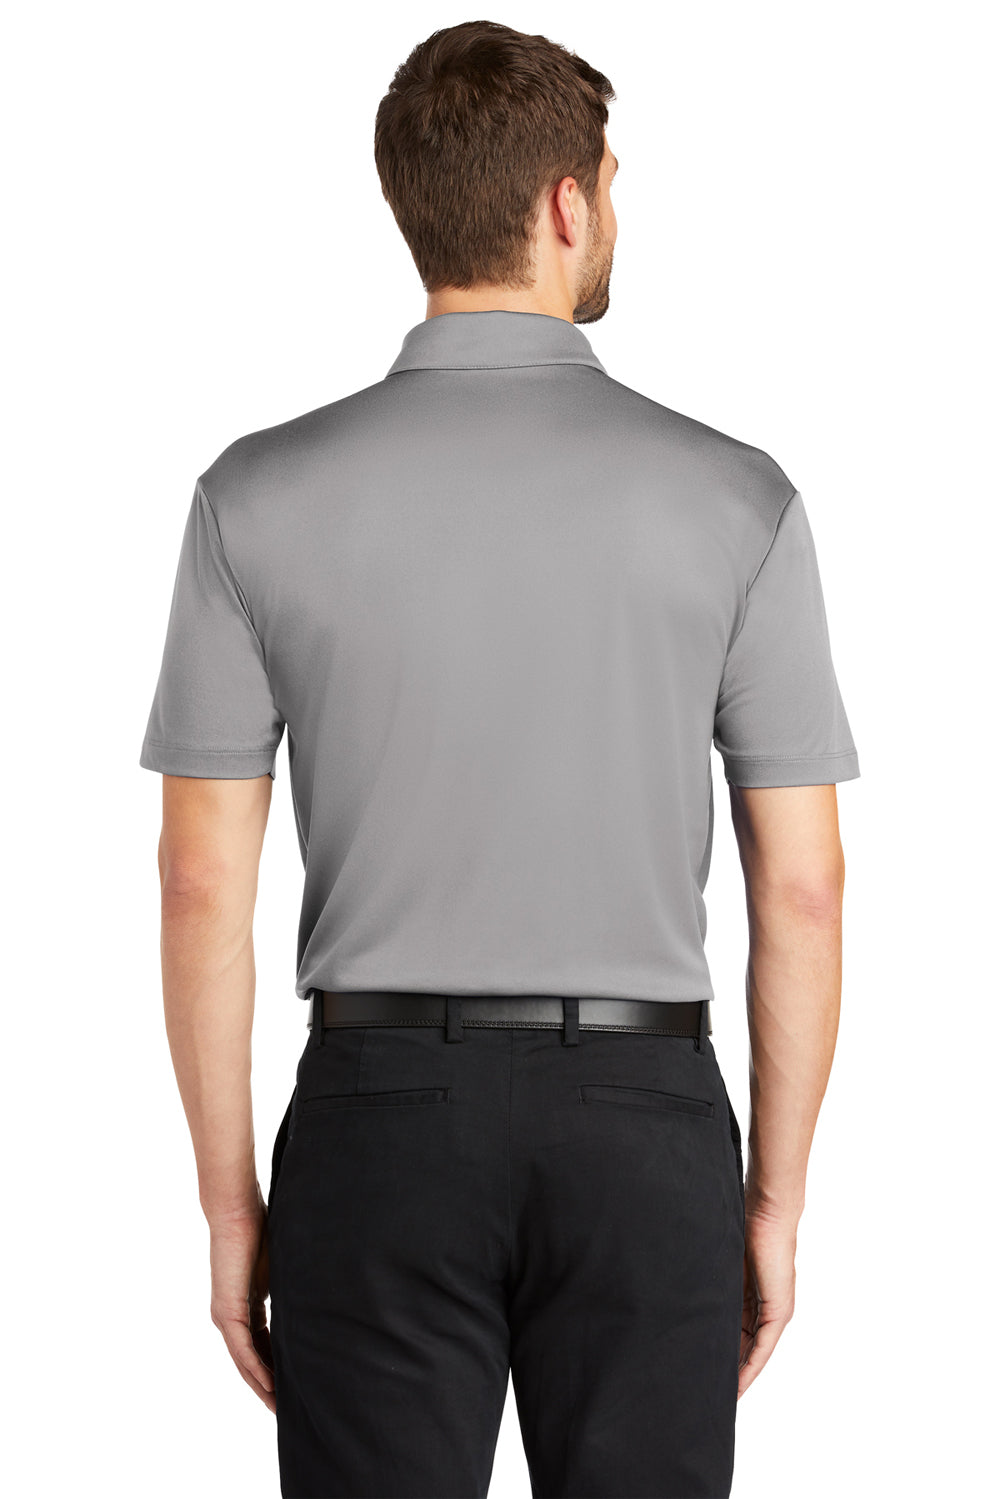 Port Authority K540P Mens Silk Touch Performance Moisture Wicking Short Sleeve Polo Shirt w/ Pocket Gusty Grey Back